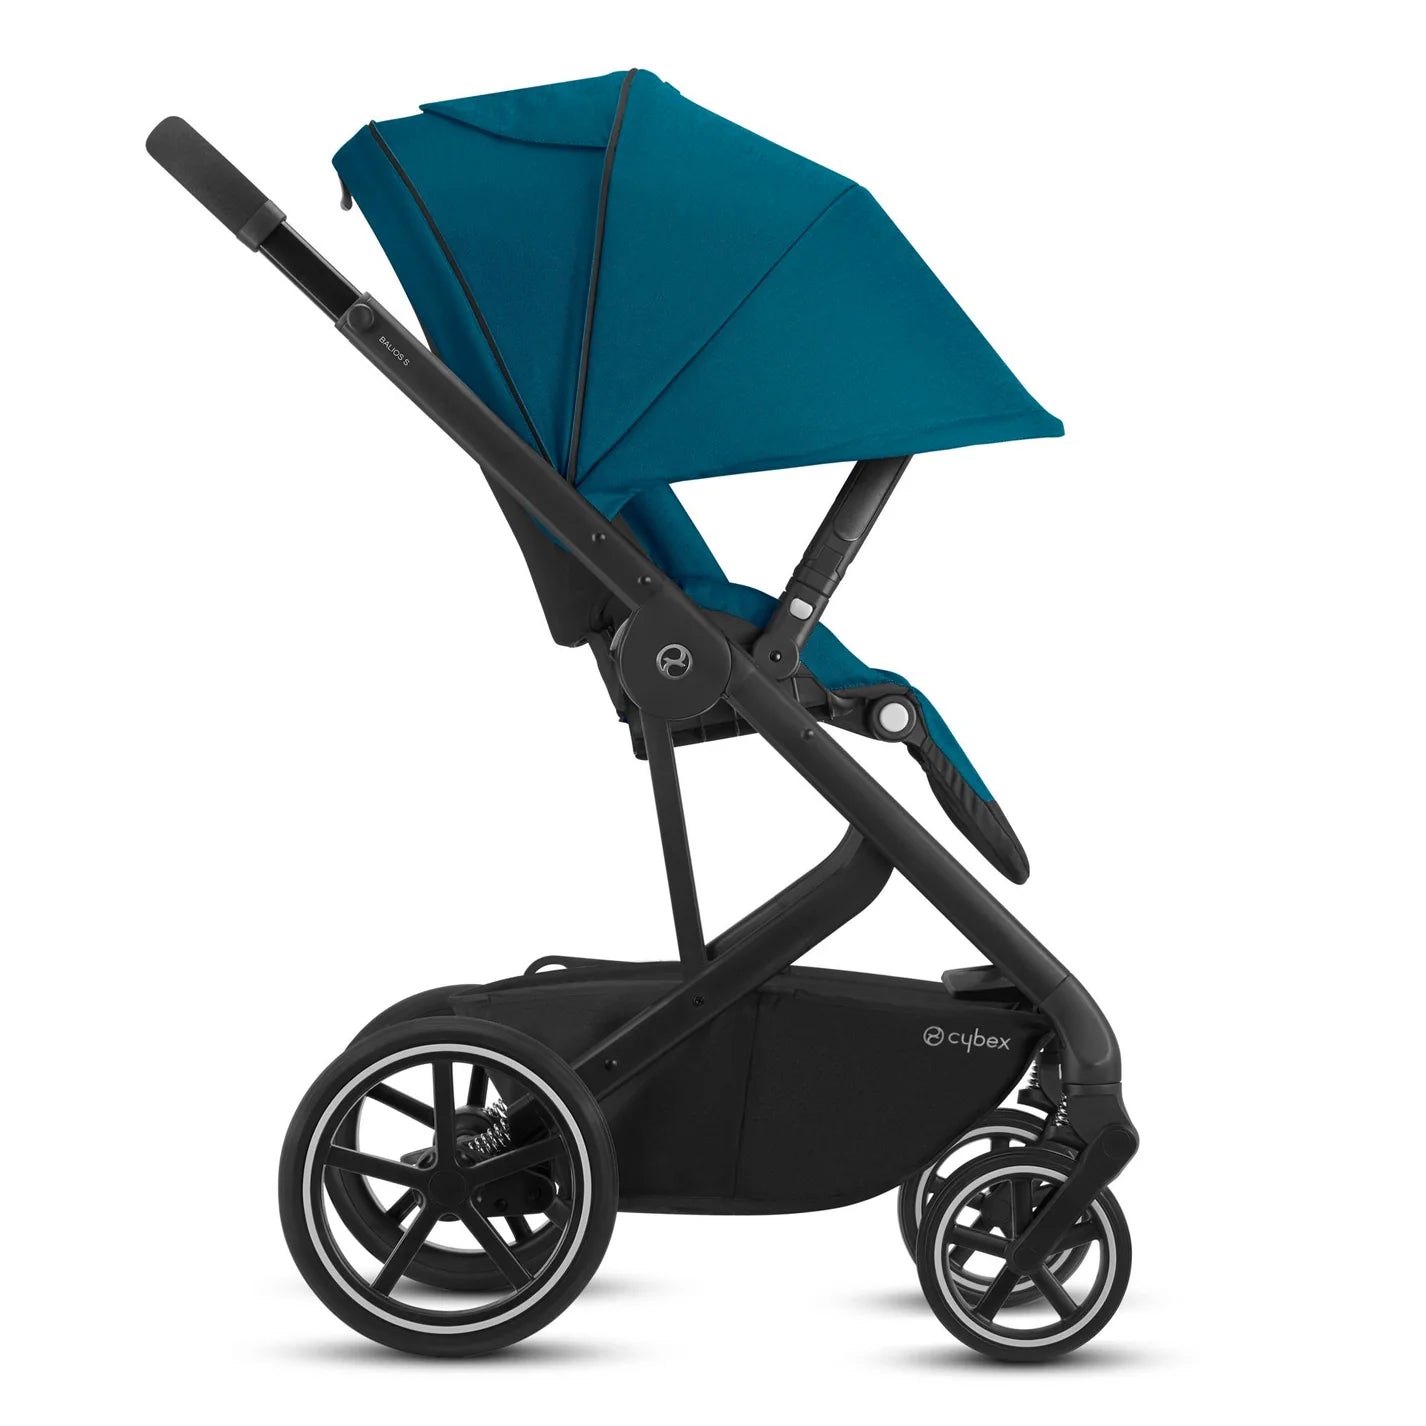 Travel System: Balios S Lux 2.0 + Silla Aton S2 + Base - River Blue